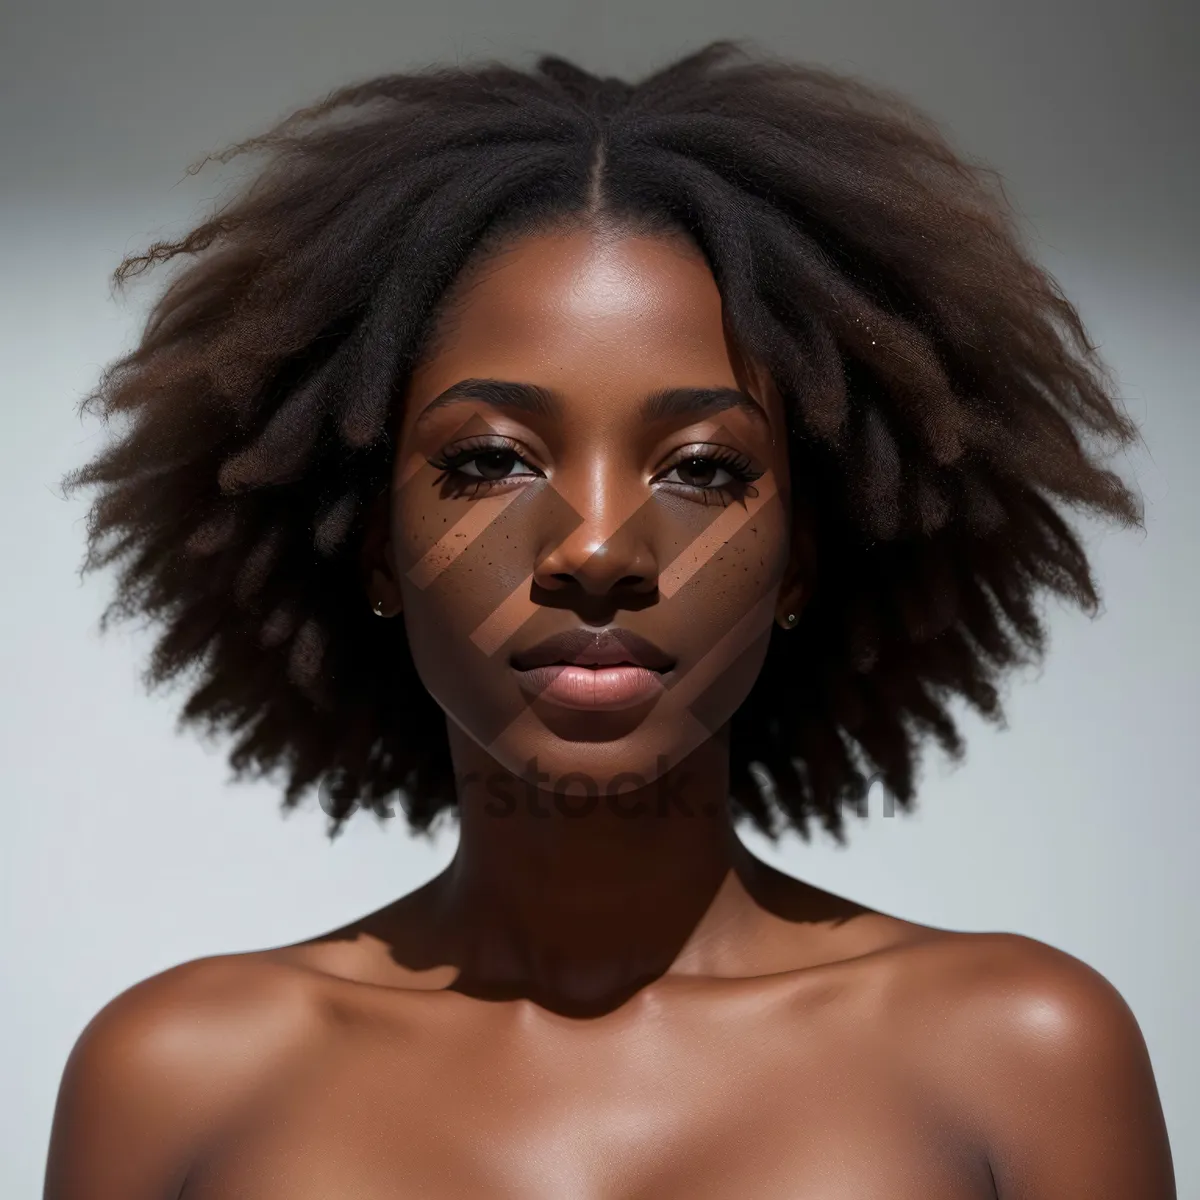 Picture of Stunning Afro-Styled Fashion Portrait with Sensual Elegance